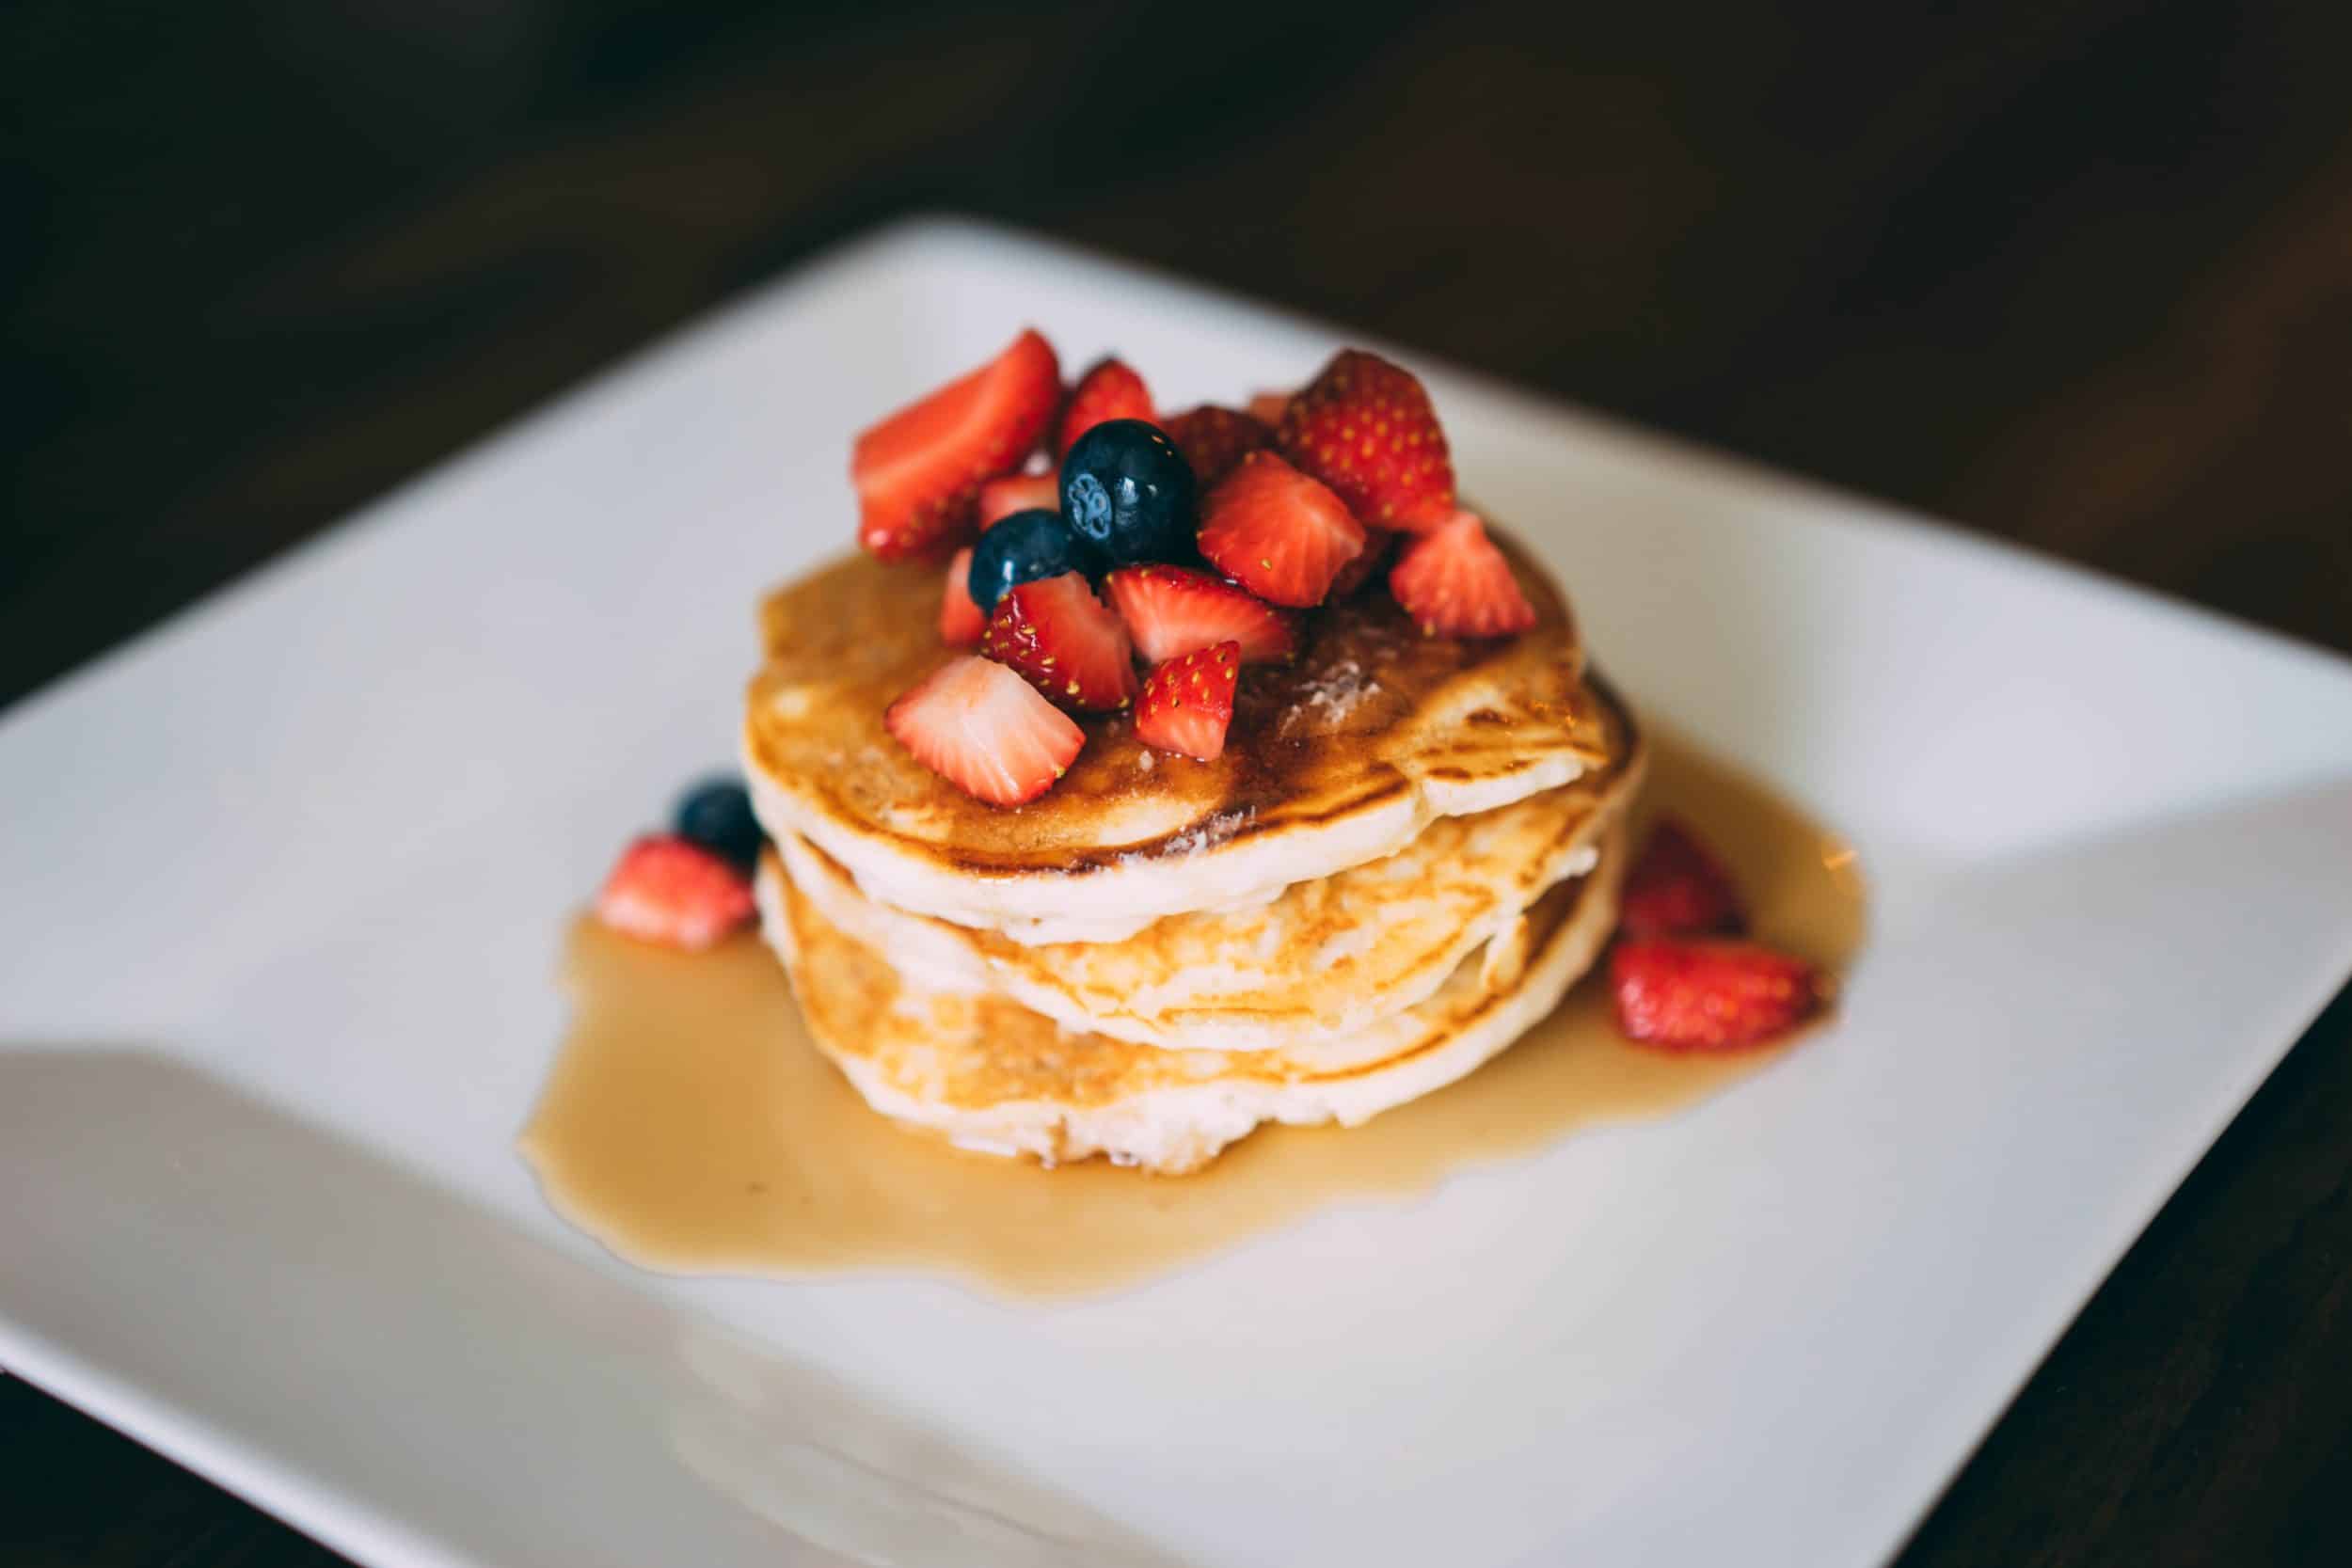 pancakes topped with syrup and berries on white plate